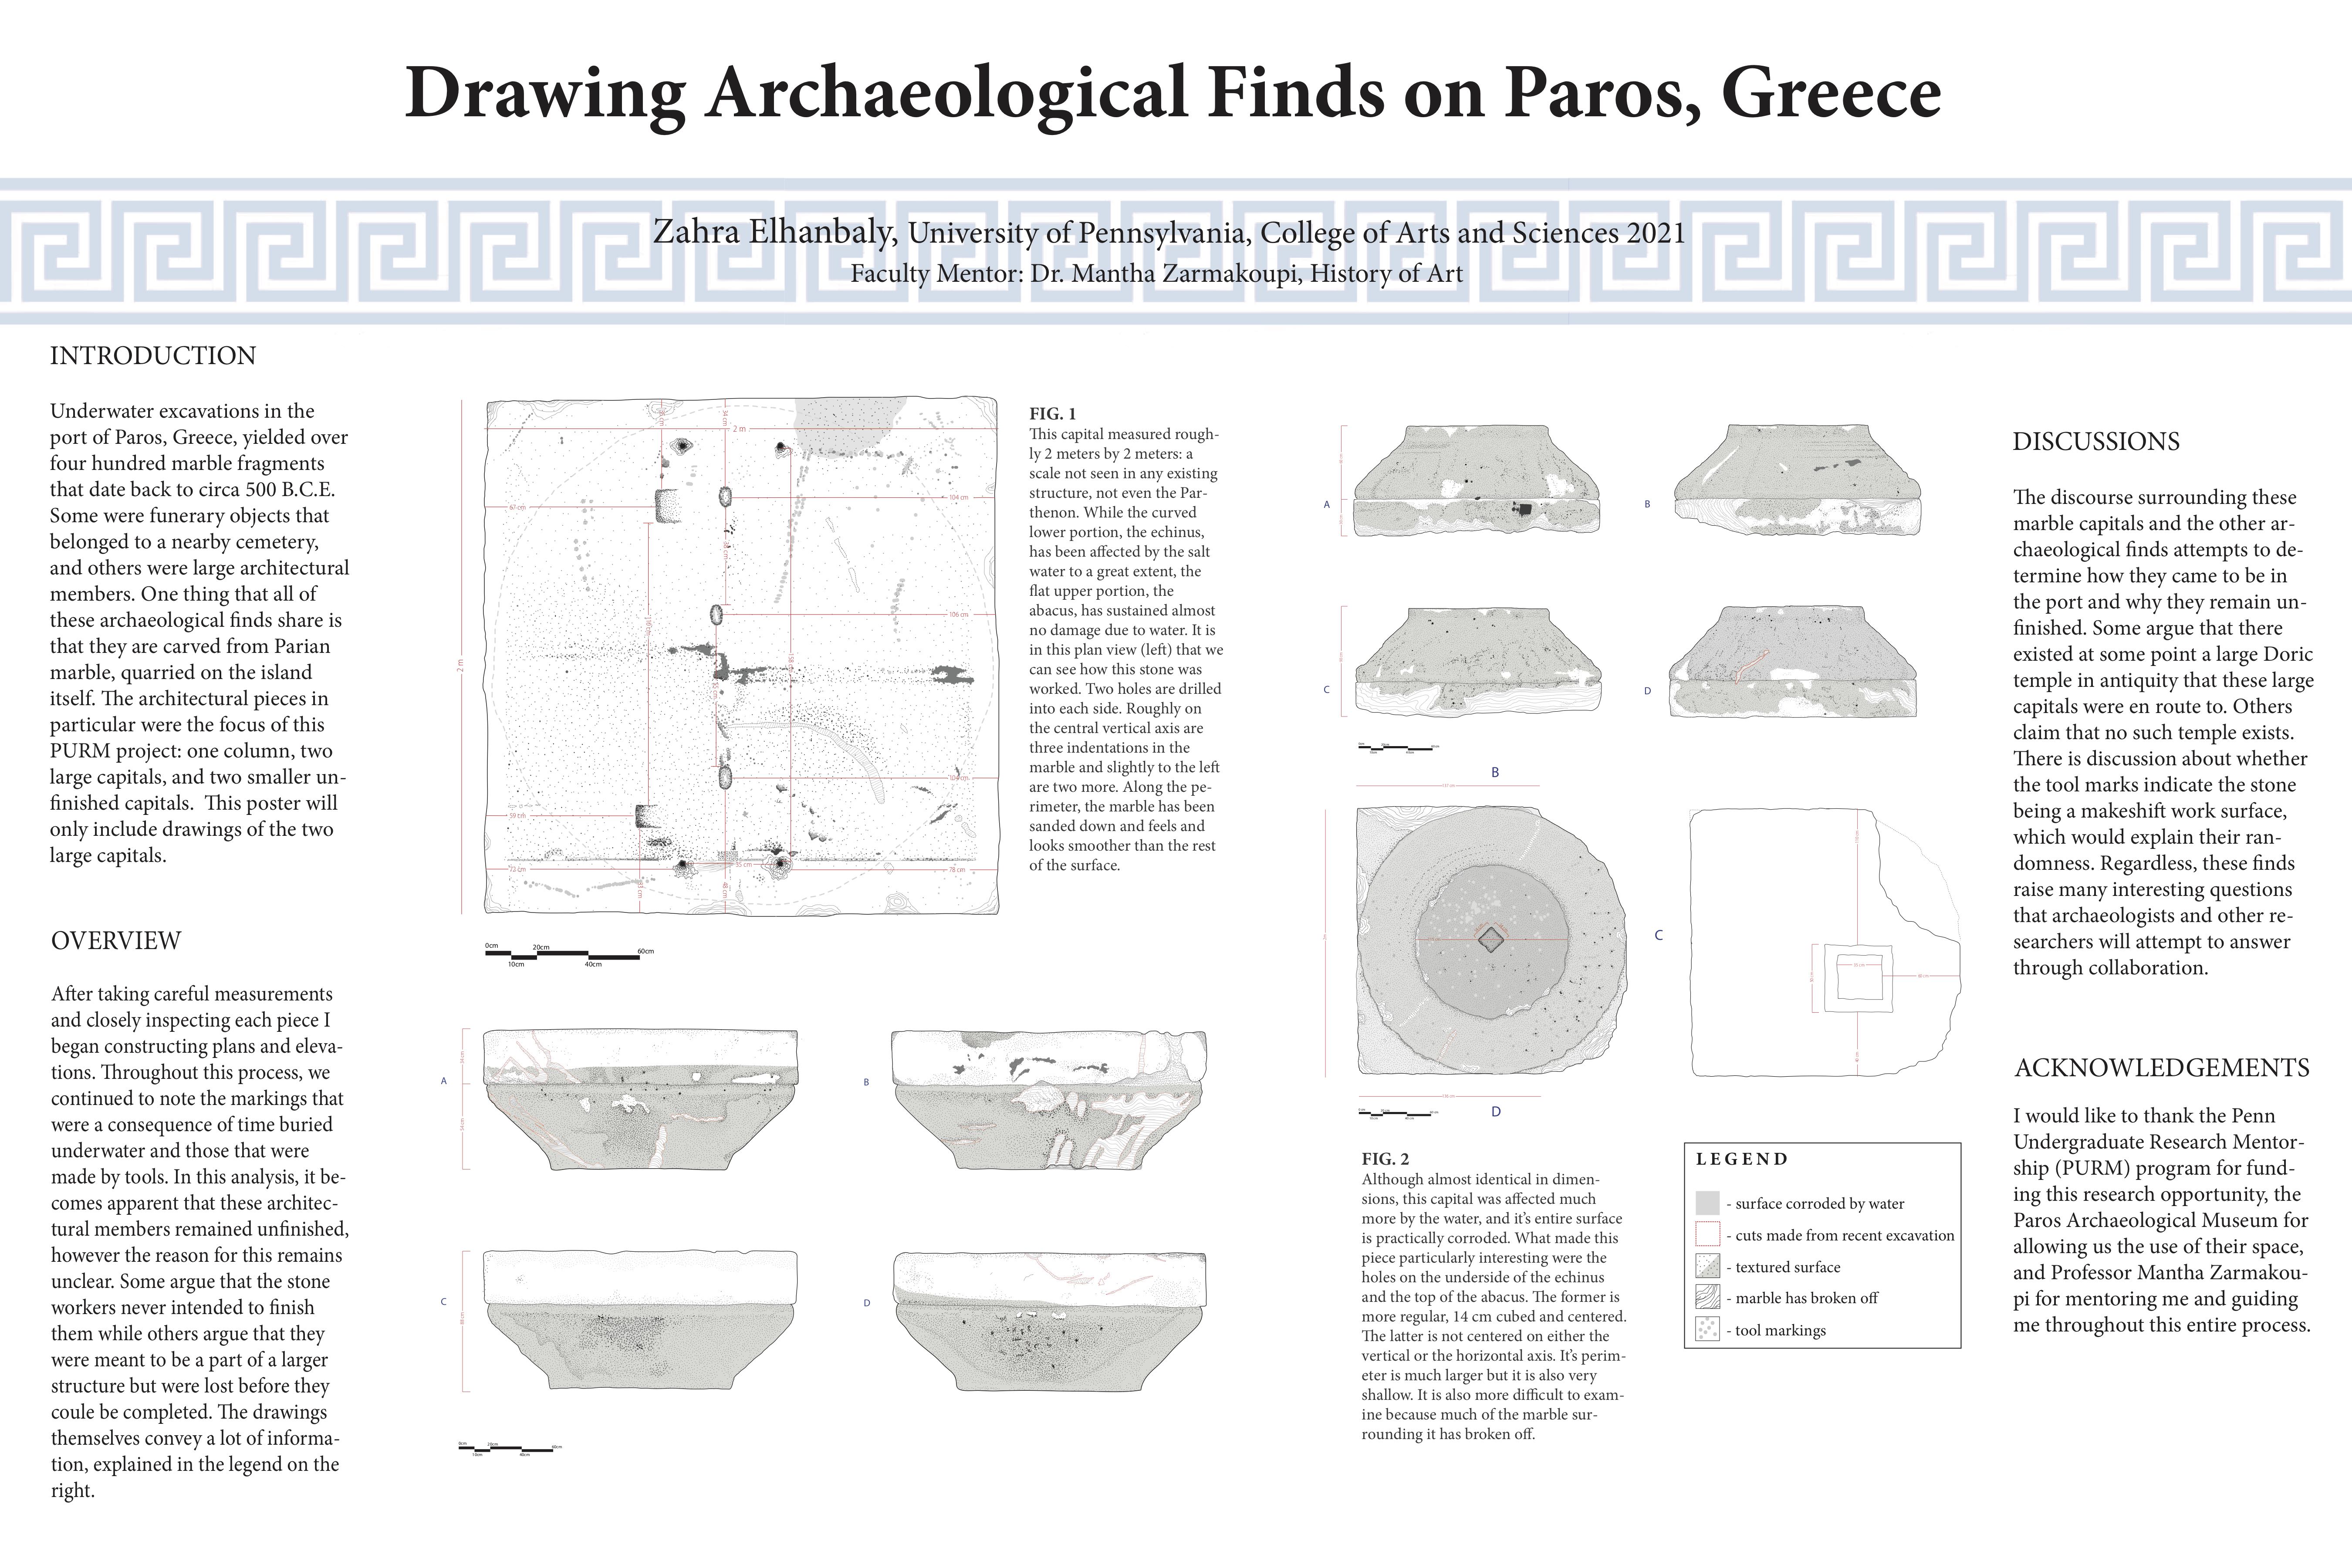 poster with drawing of archaeological finds on Paros Greece